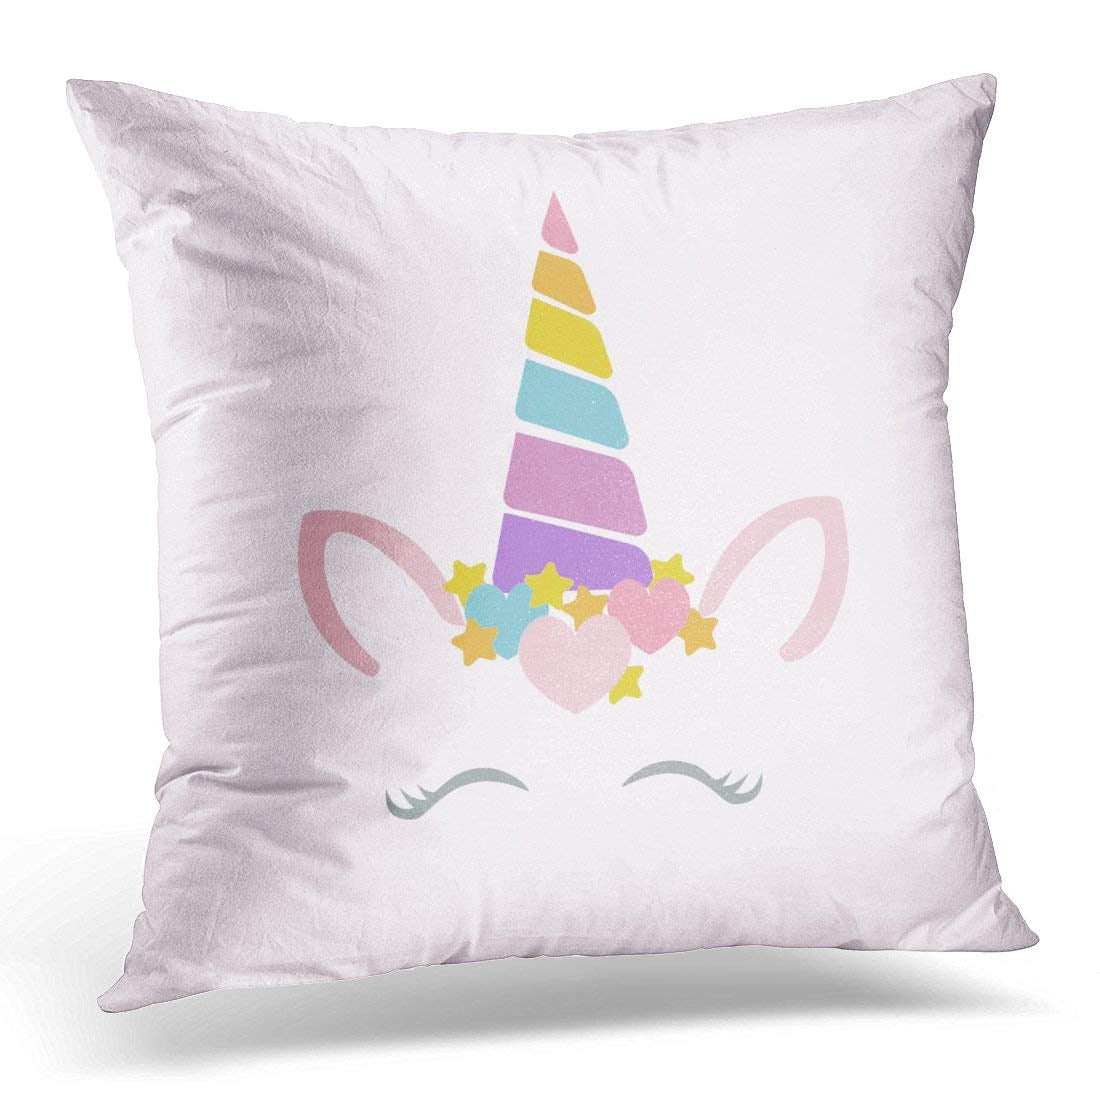 CMFUN Blue Rainbow Happy Unicorn Face Colorful Horn Pillow Cover 16x16 Inches Throw Pillow Case Cushion Cover